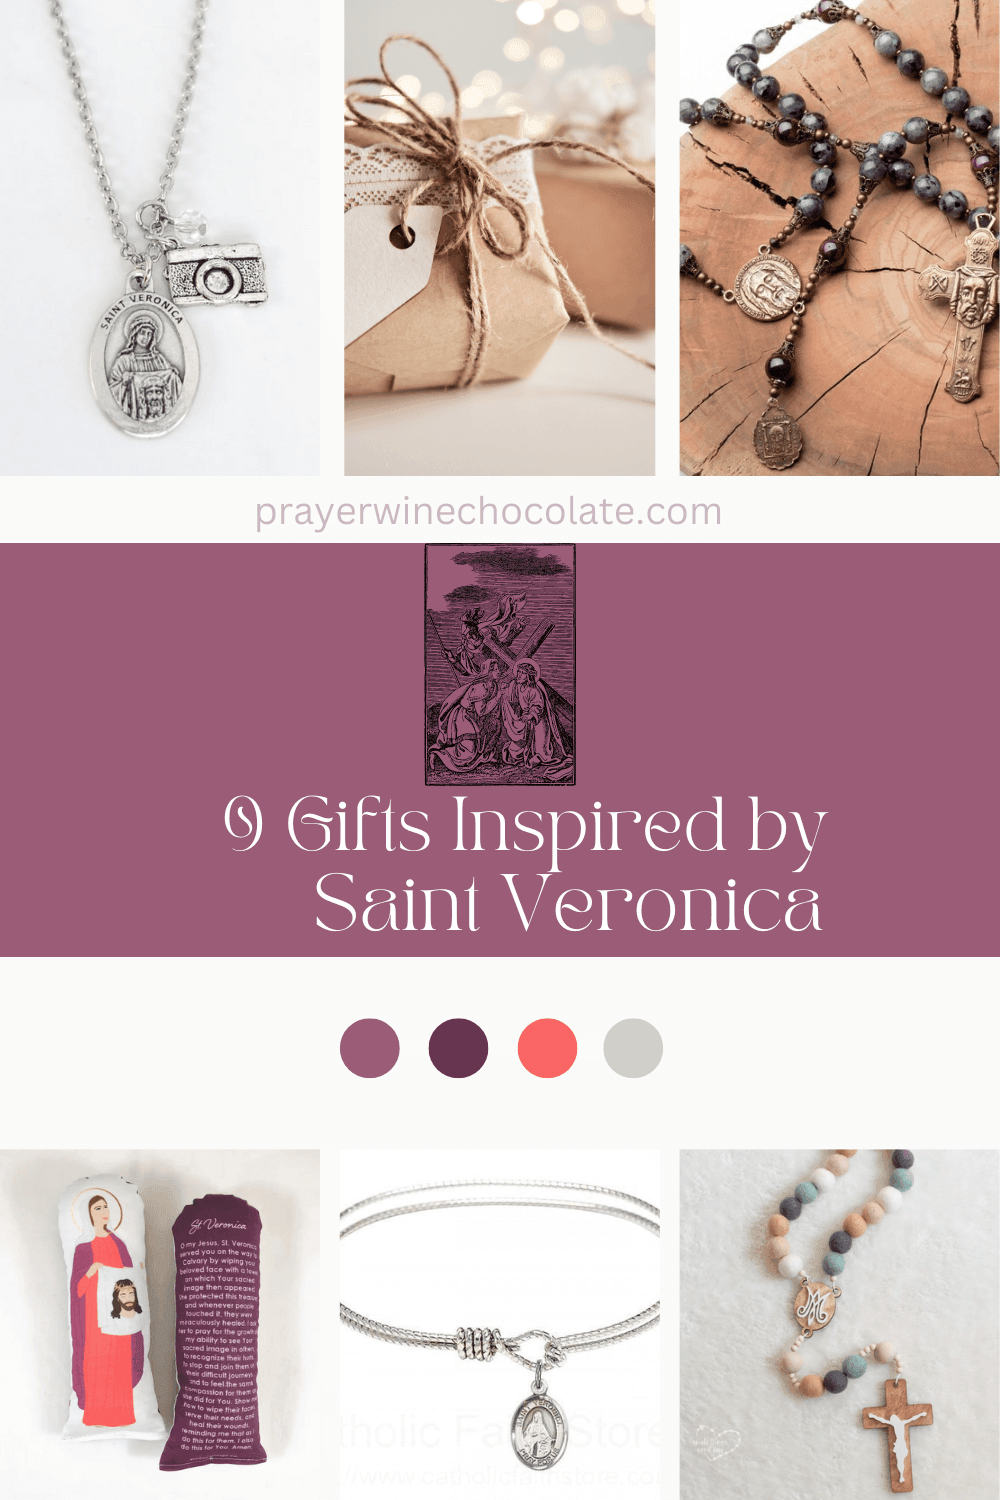 Pinterest graphic, shows some of the gifts listed in this post and has the title of the post "9 Gifts Inspired by Saint Veronica"